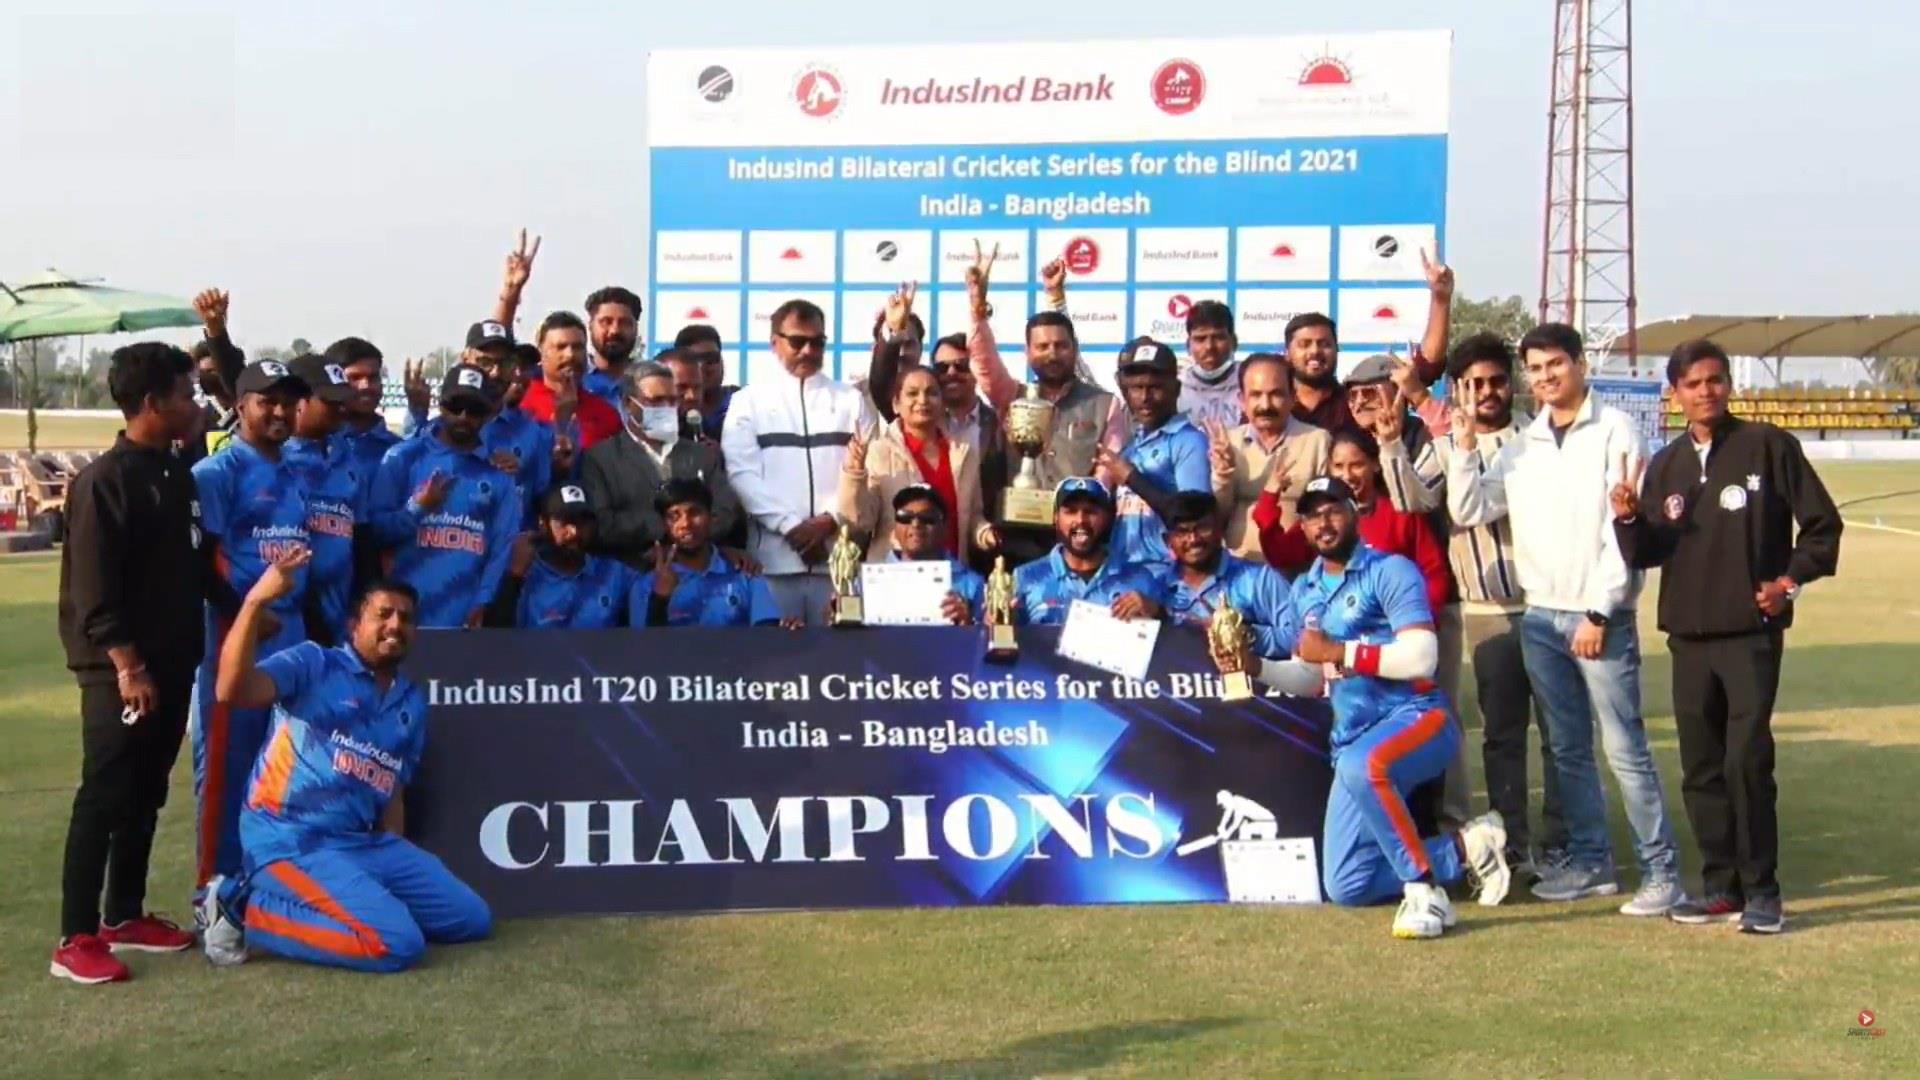 India clean sweep T20 series against Bangladesh in IndusInd Bilateral Cricket Series for the Blind 2021